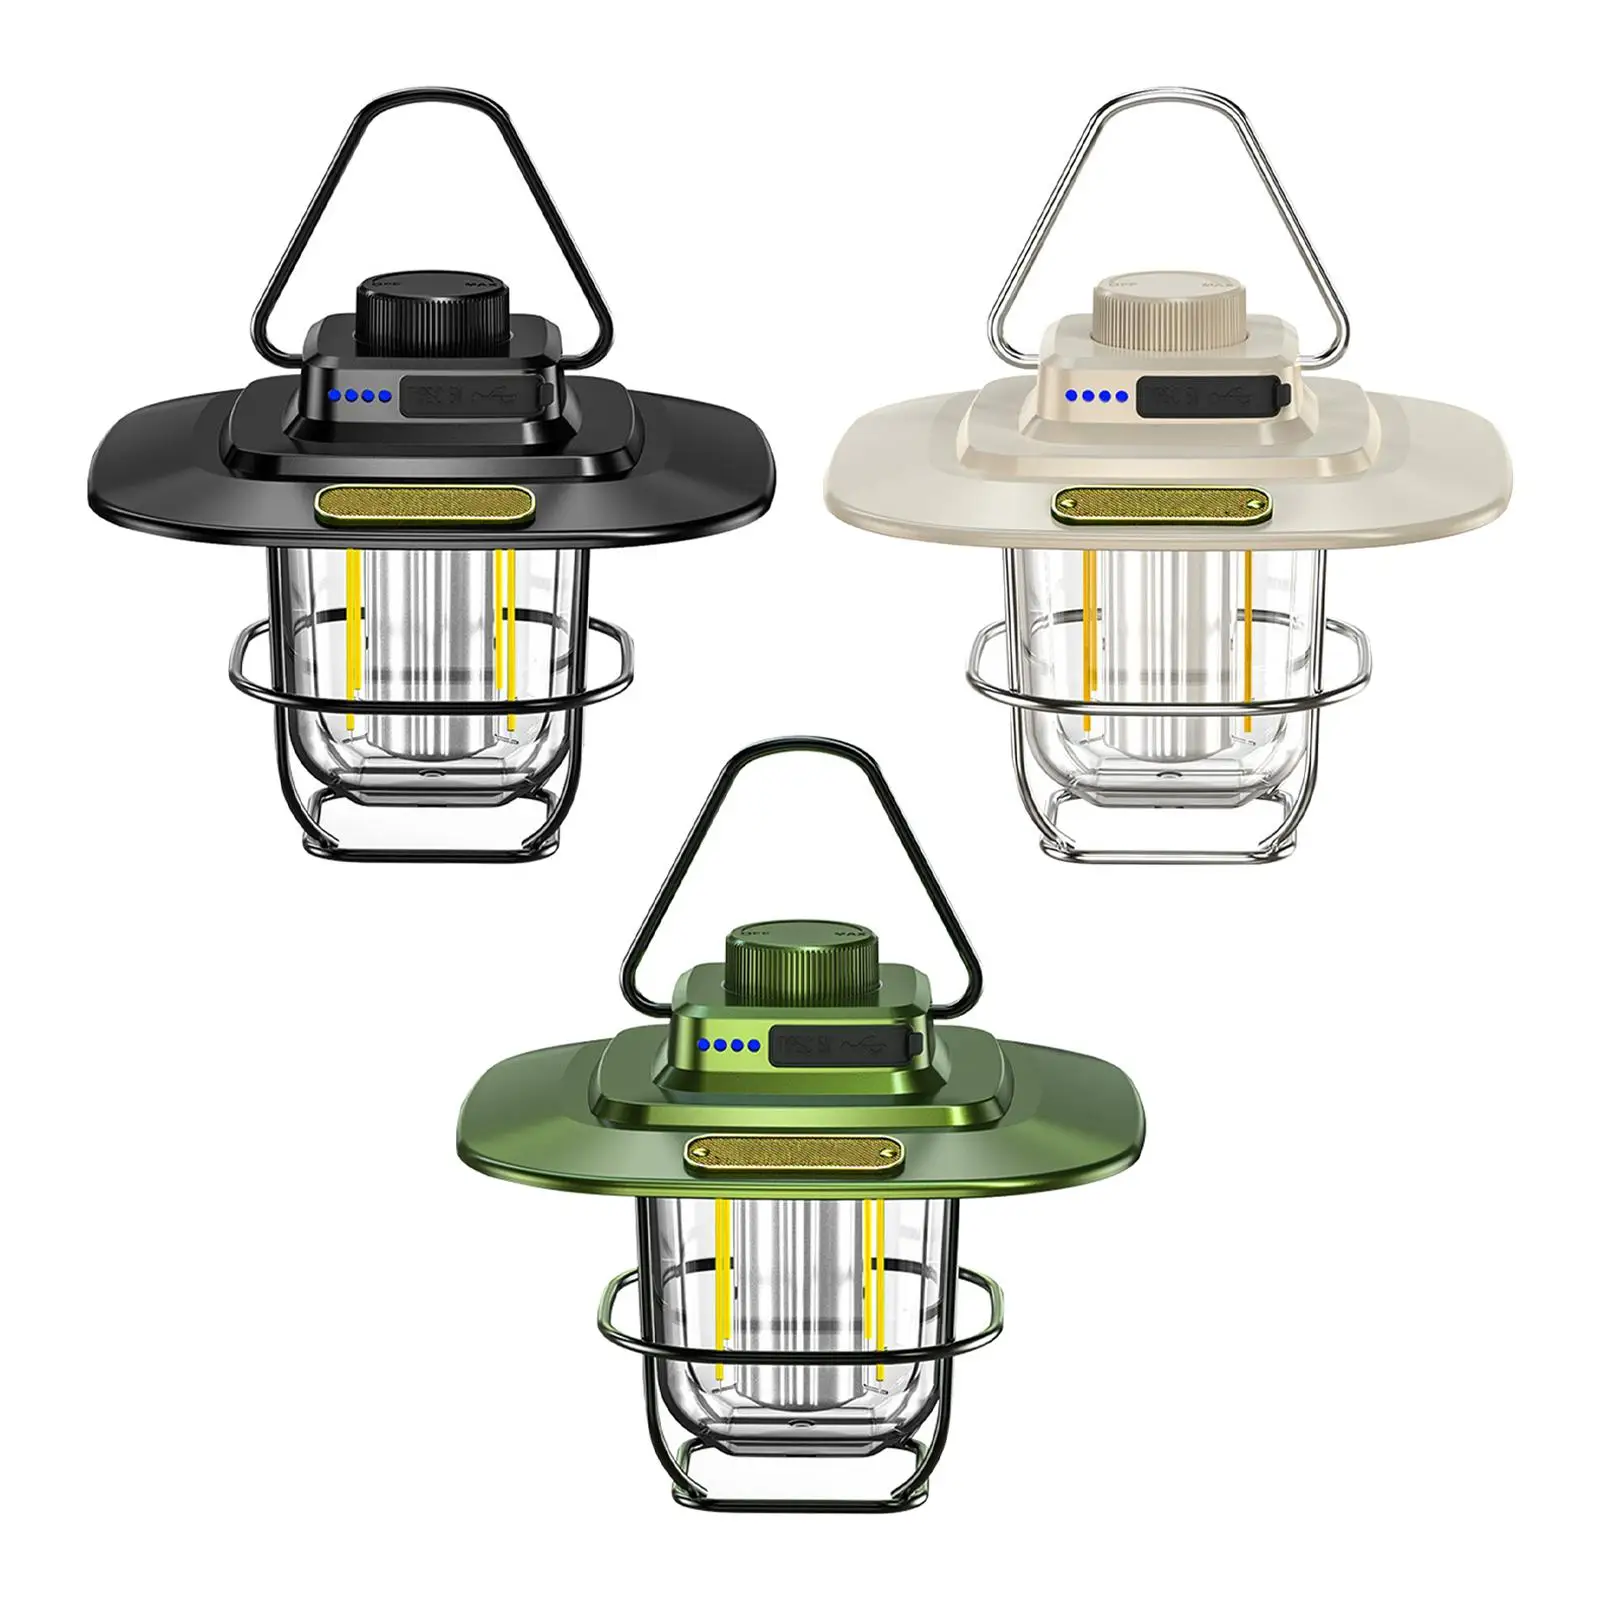 

LED Camping Lantern Night Lamp Hanging Portable Tent Light for Yard Hiking Indoors Outdoors